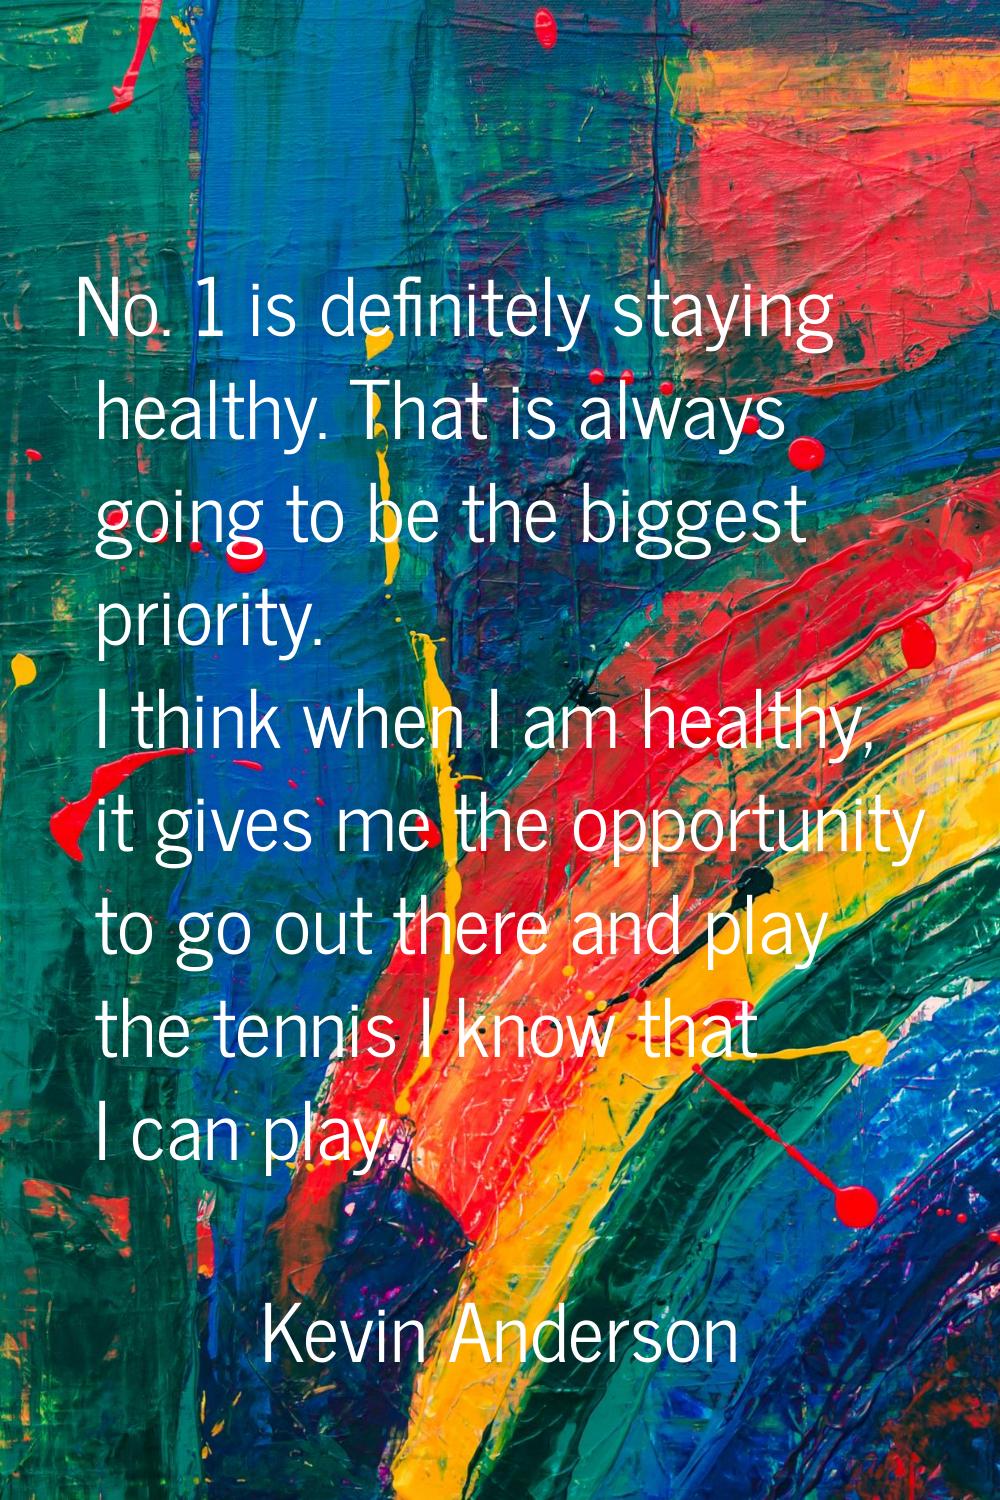 No. 1 is definitely staying healthy. That is always going to be the biggest priority. I think when 